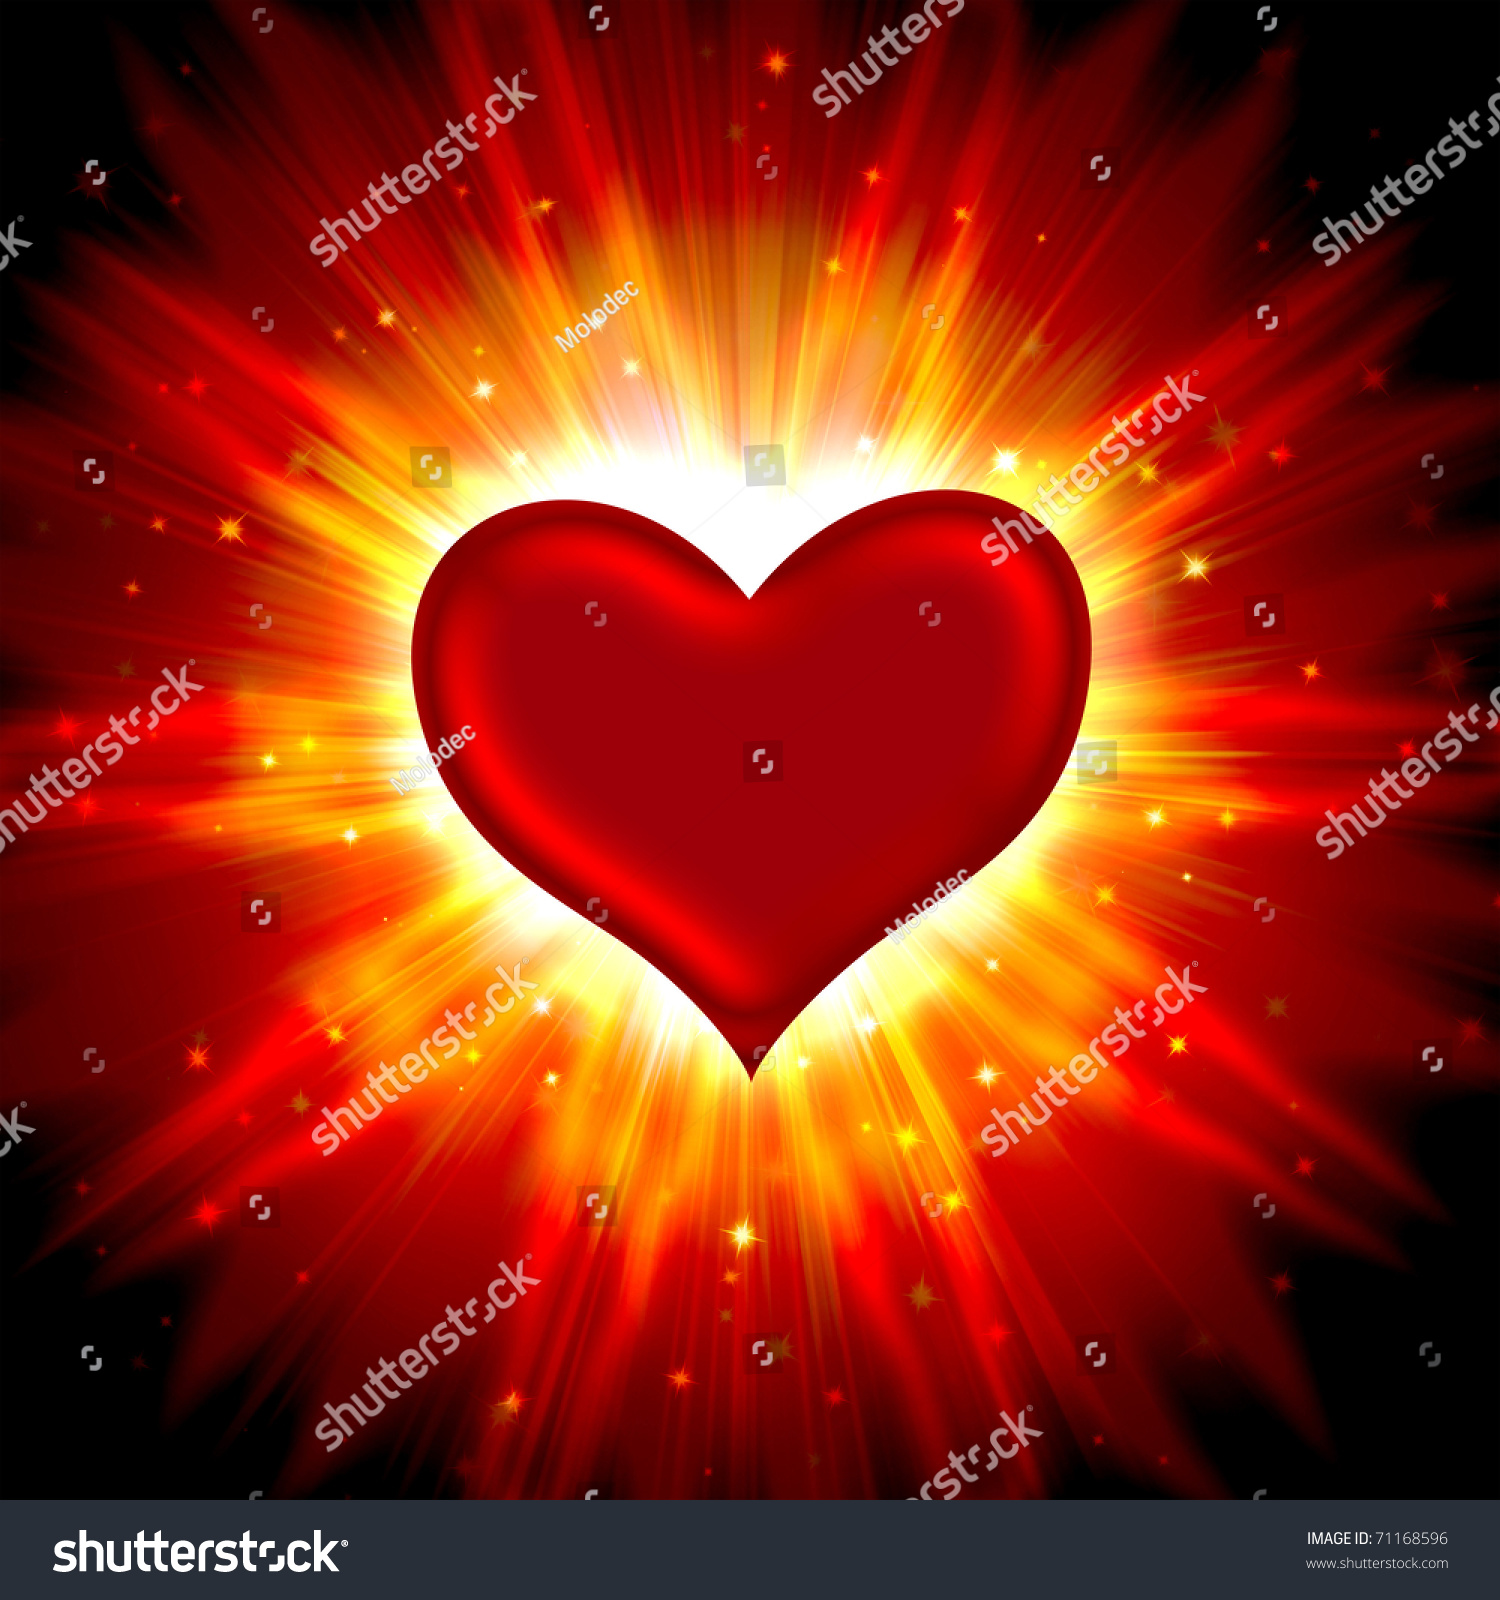 Red Heart Black Background Related Keywords Amp Suggestions